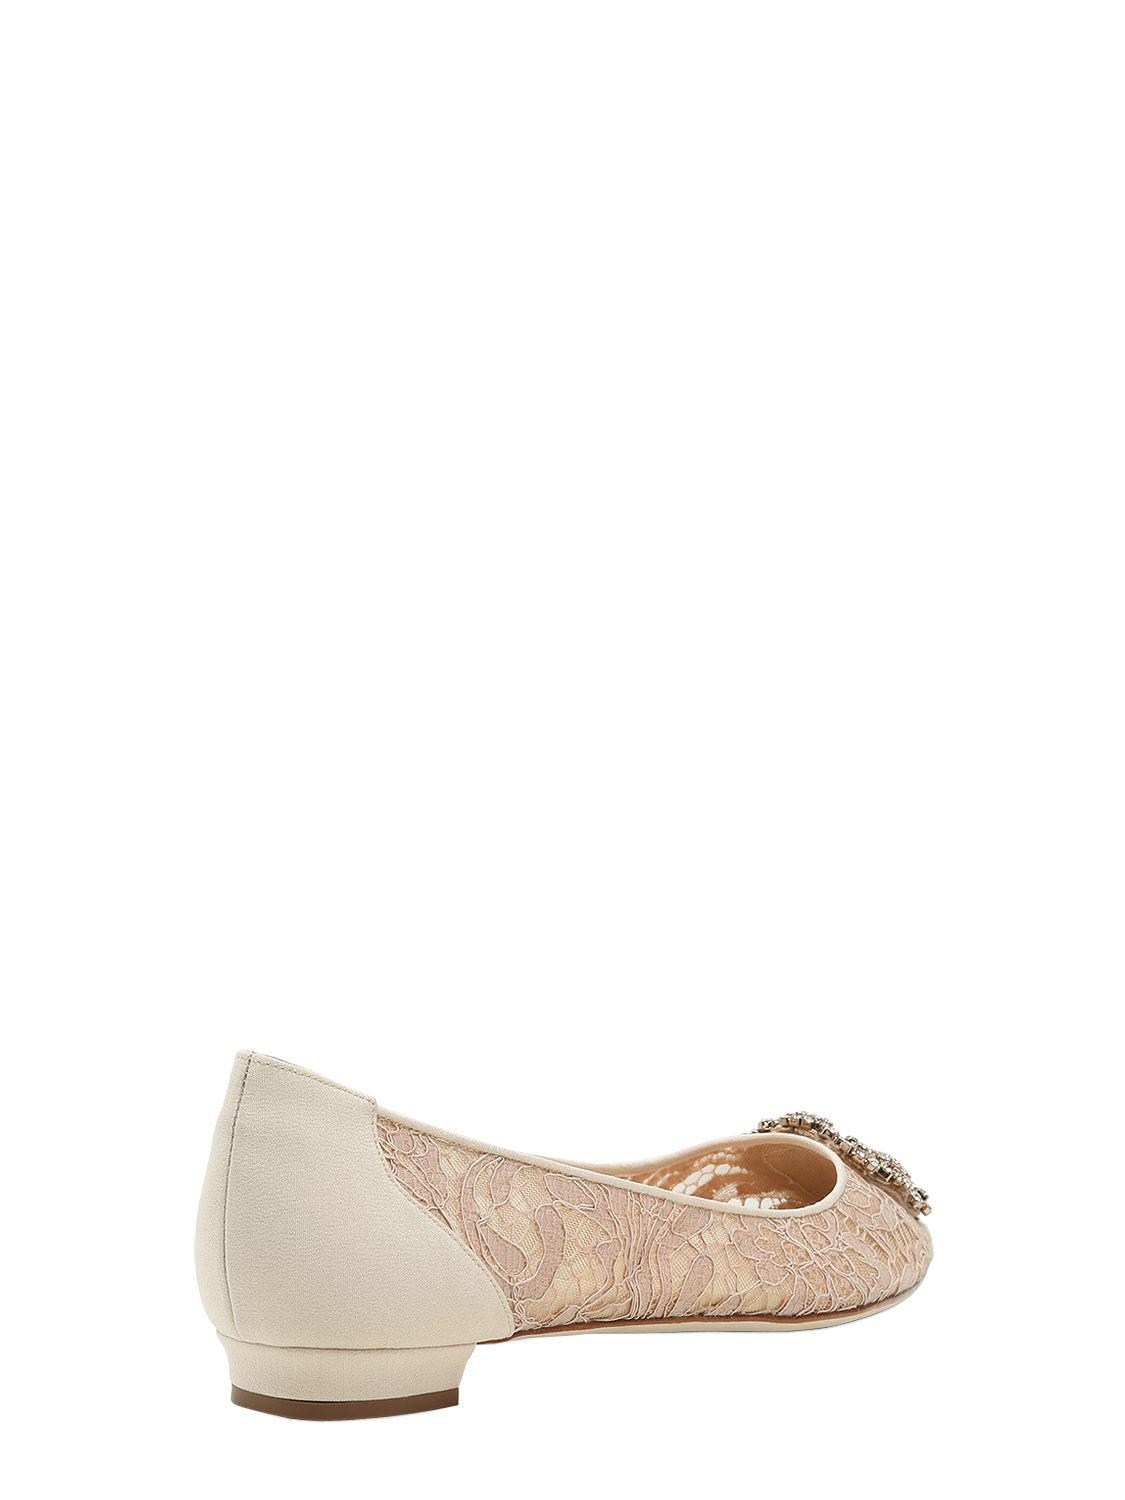 Manolo Blahnik 10mm Hangisi Lace Flats in Nude (Natural) - Lyst